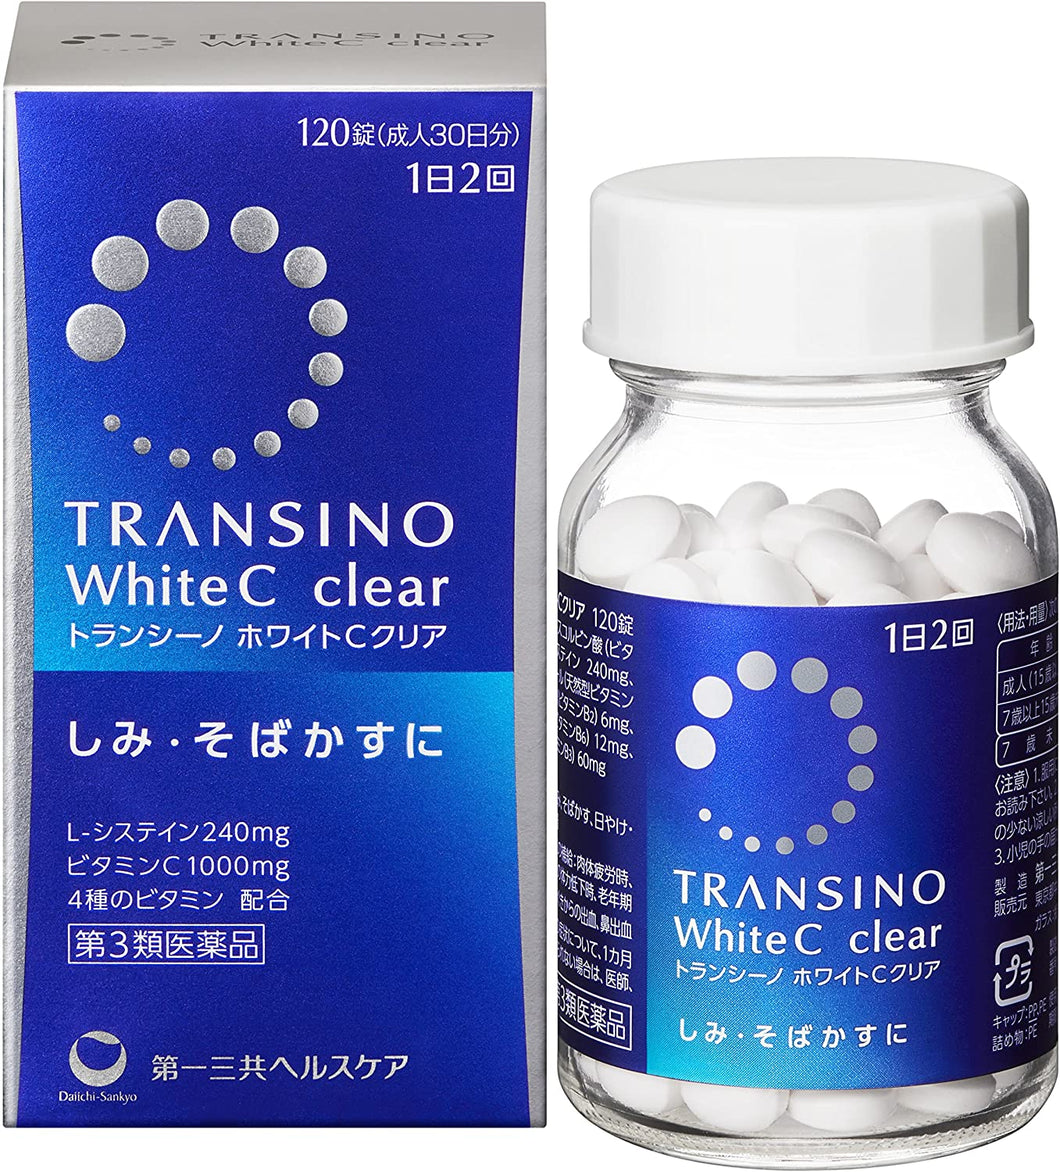 Transino White C Clear 120 Tablets for 60 Days, Alleviate Spots & Freckles from Inside, Vitamin C B E, Japan Whitening Fair Skin Health Beauty Supplement